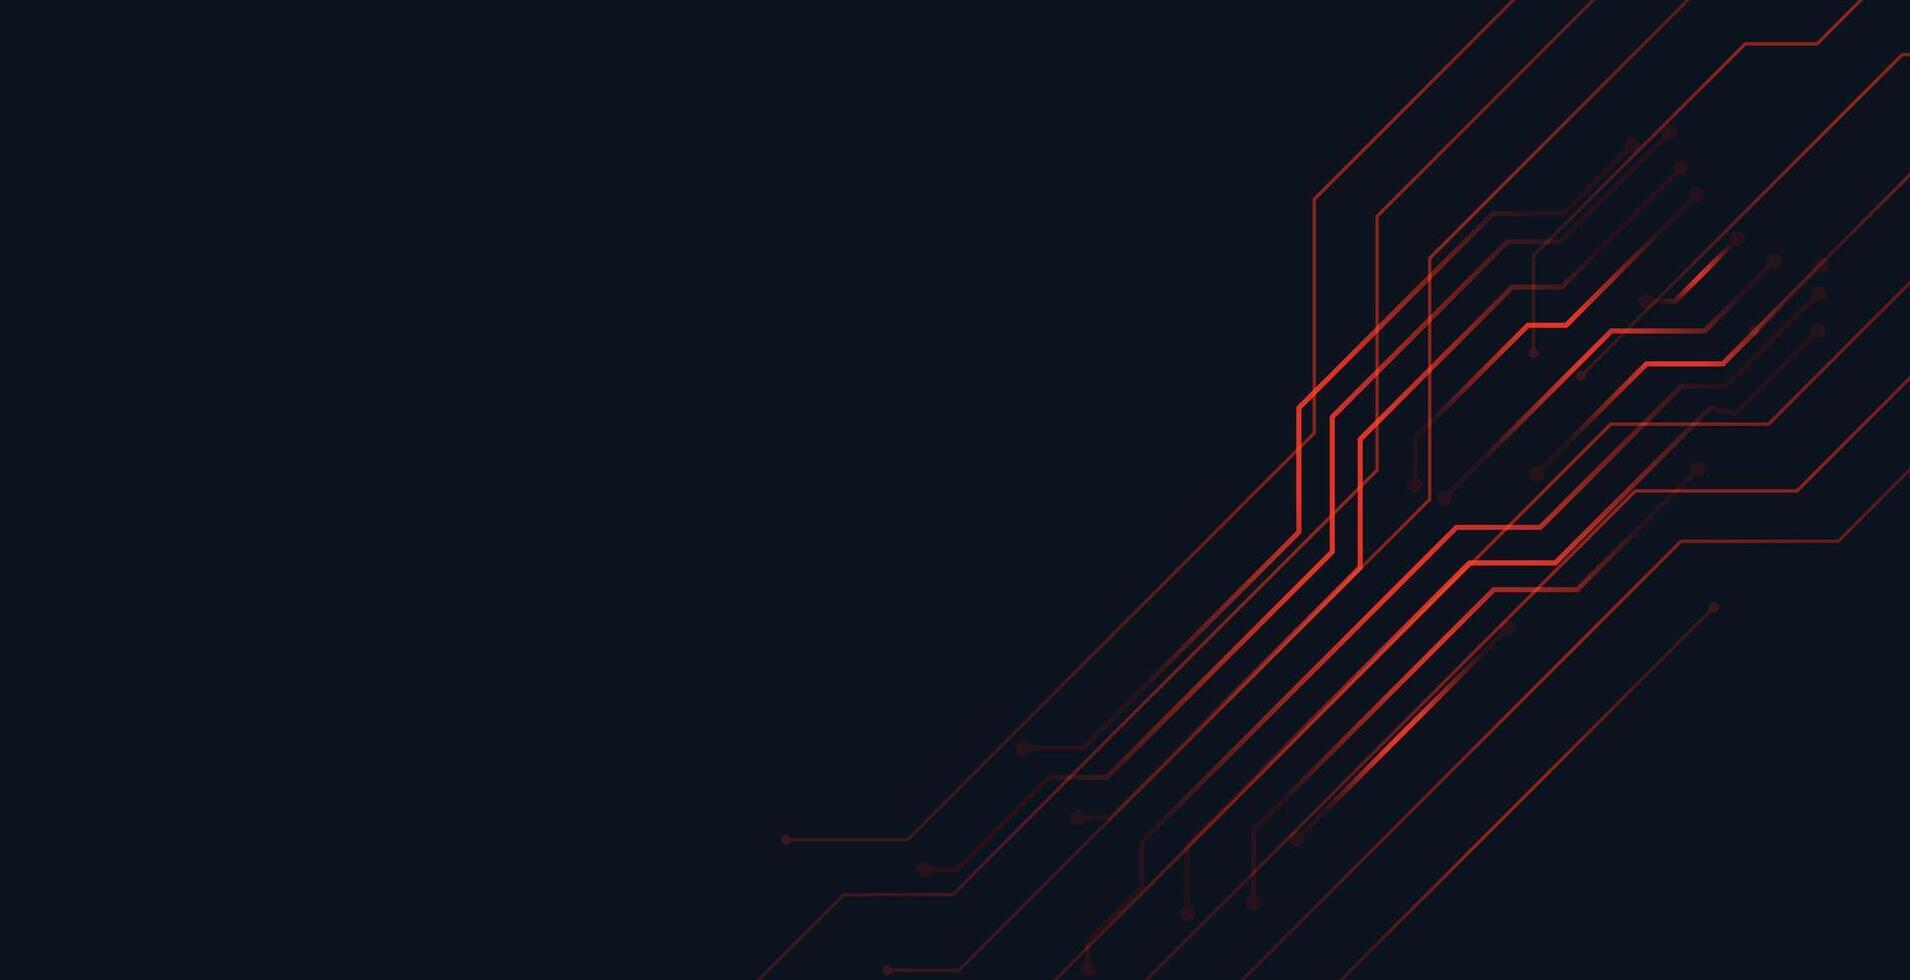 digital red circuit lines technology background design vector